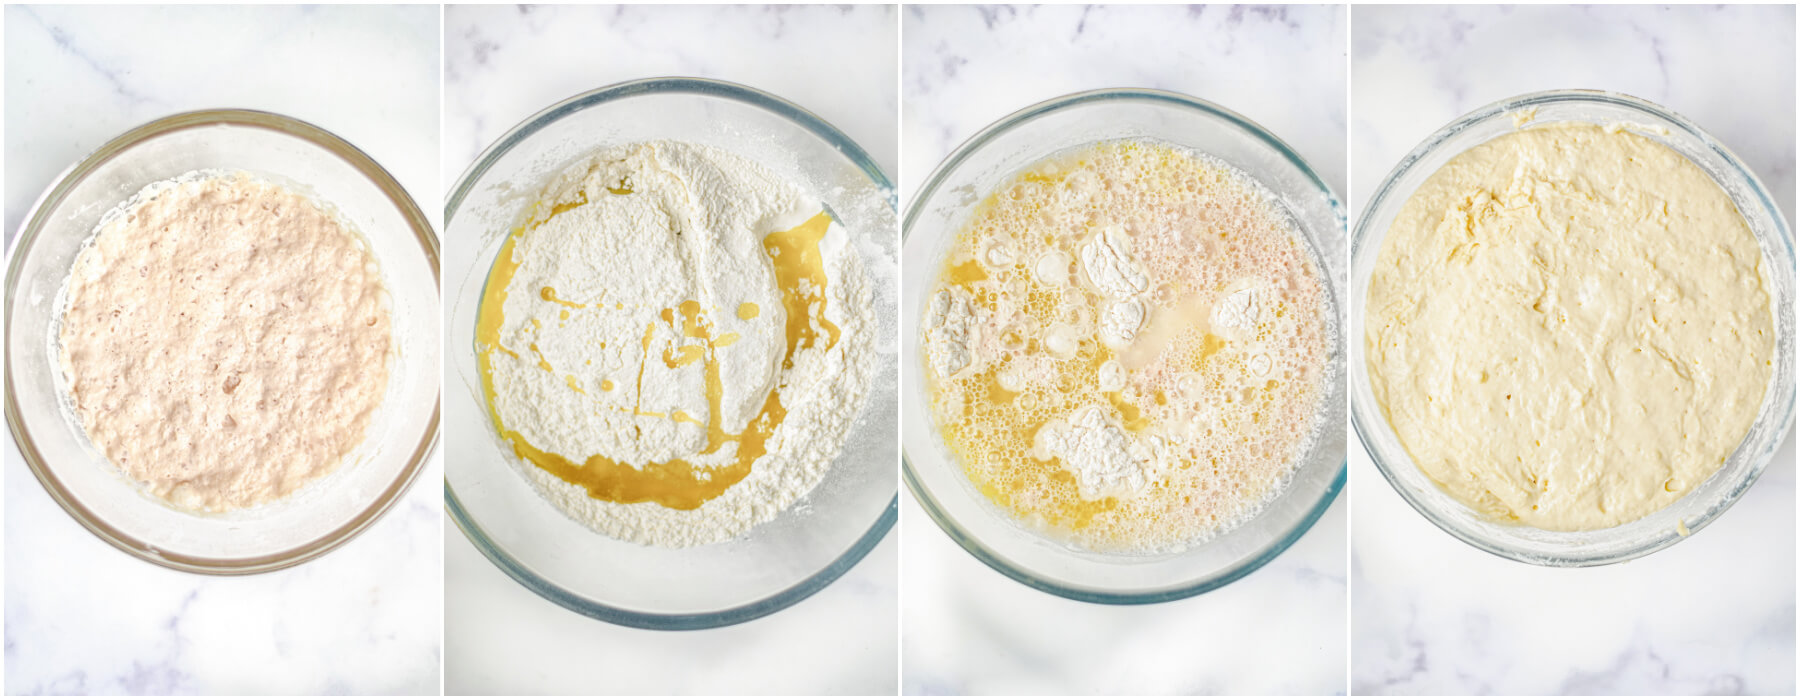 A process of photos showing how to mix bread dough from proofed yeast to proofed dough.